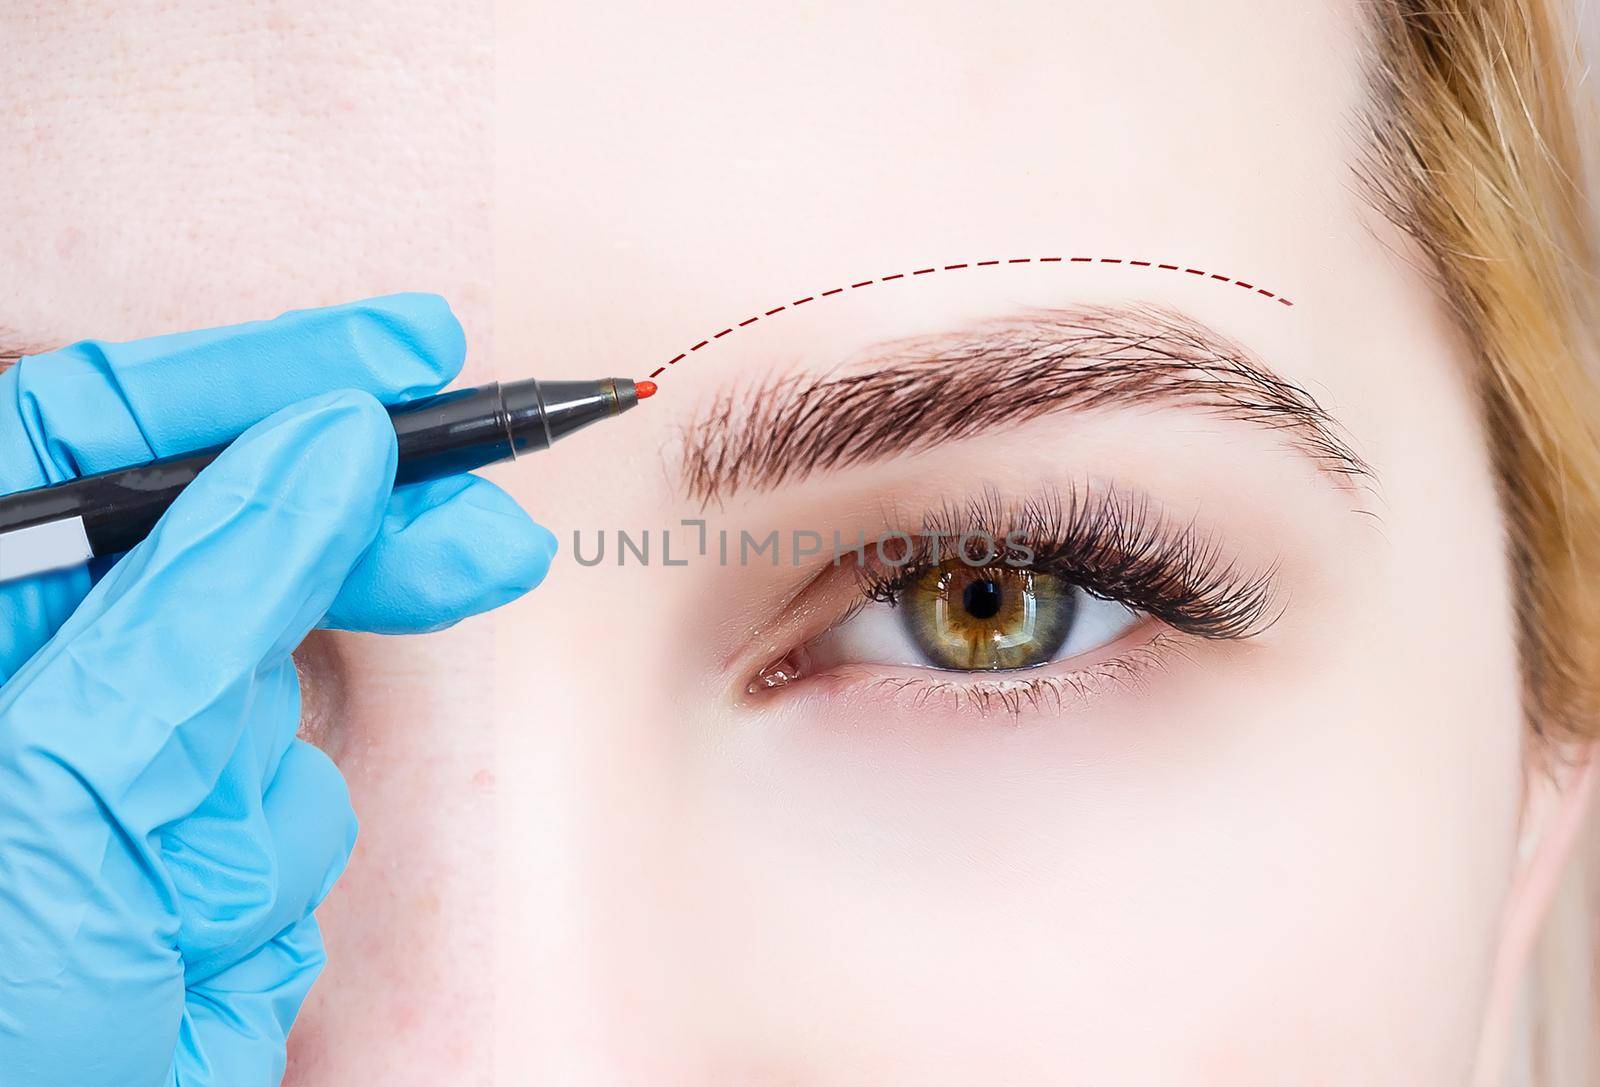 Plastic surgeon drawing dashed line under eye of girl. Hand in blue glove holding pencil. Plastic surgery, beauty portrait, closeup